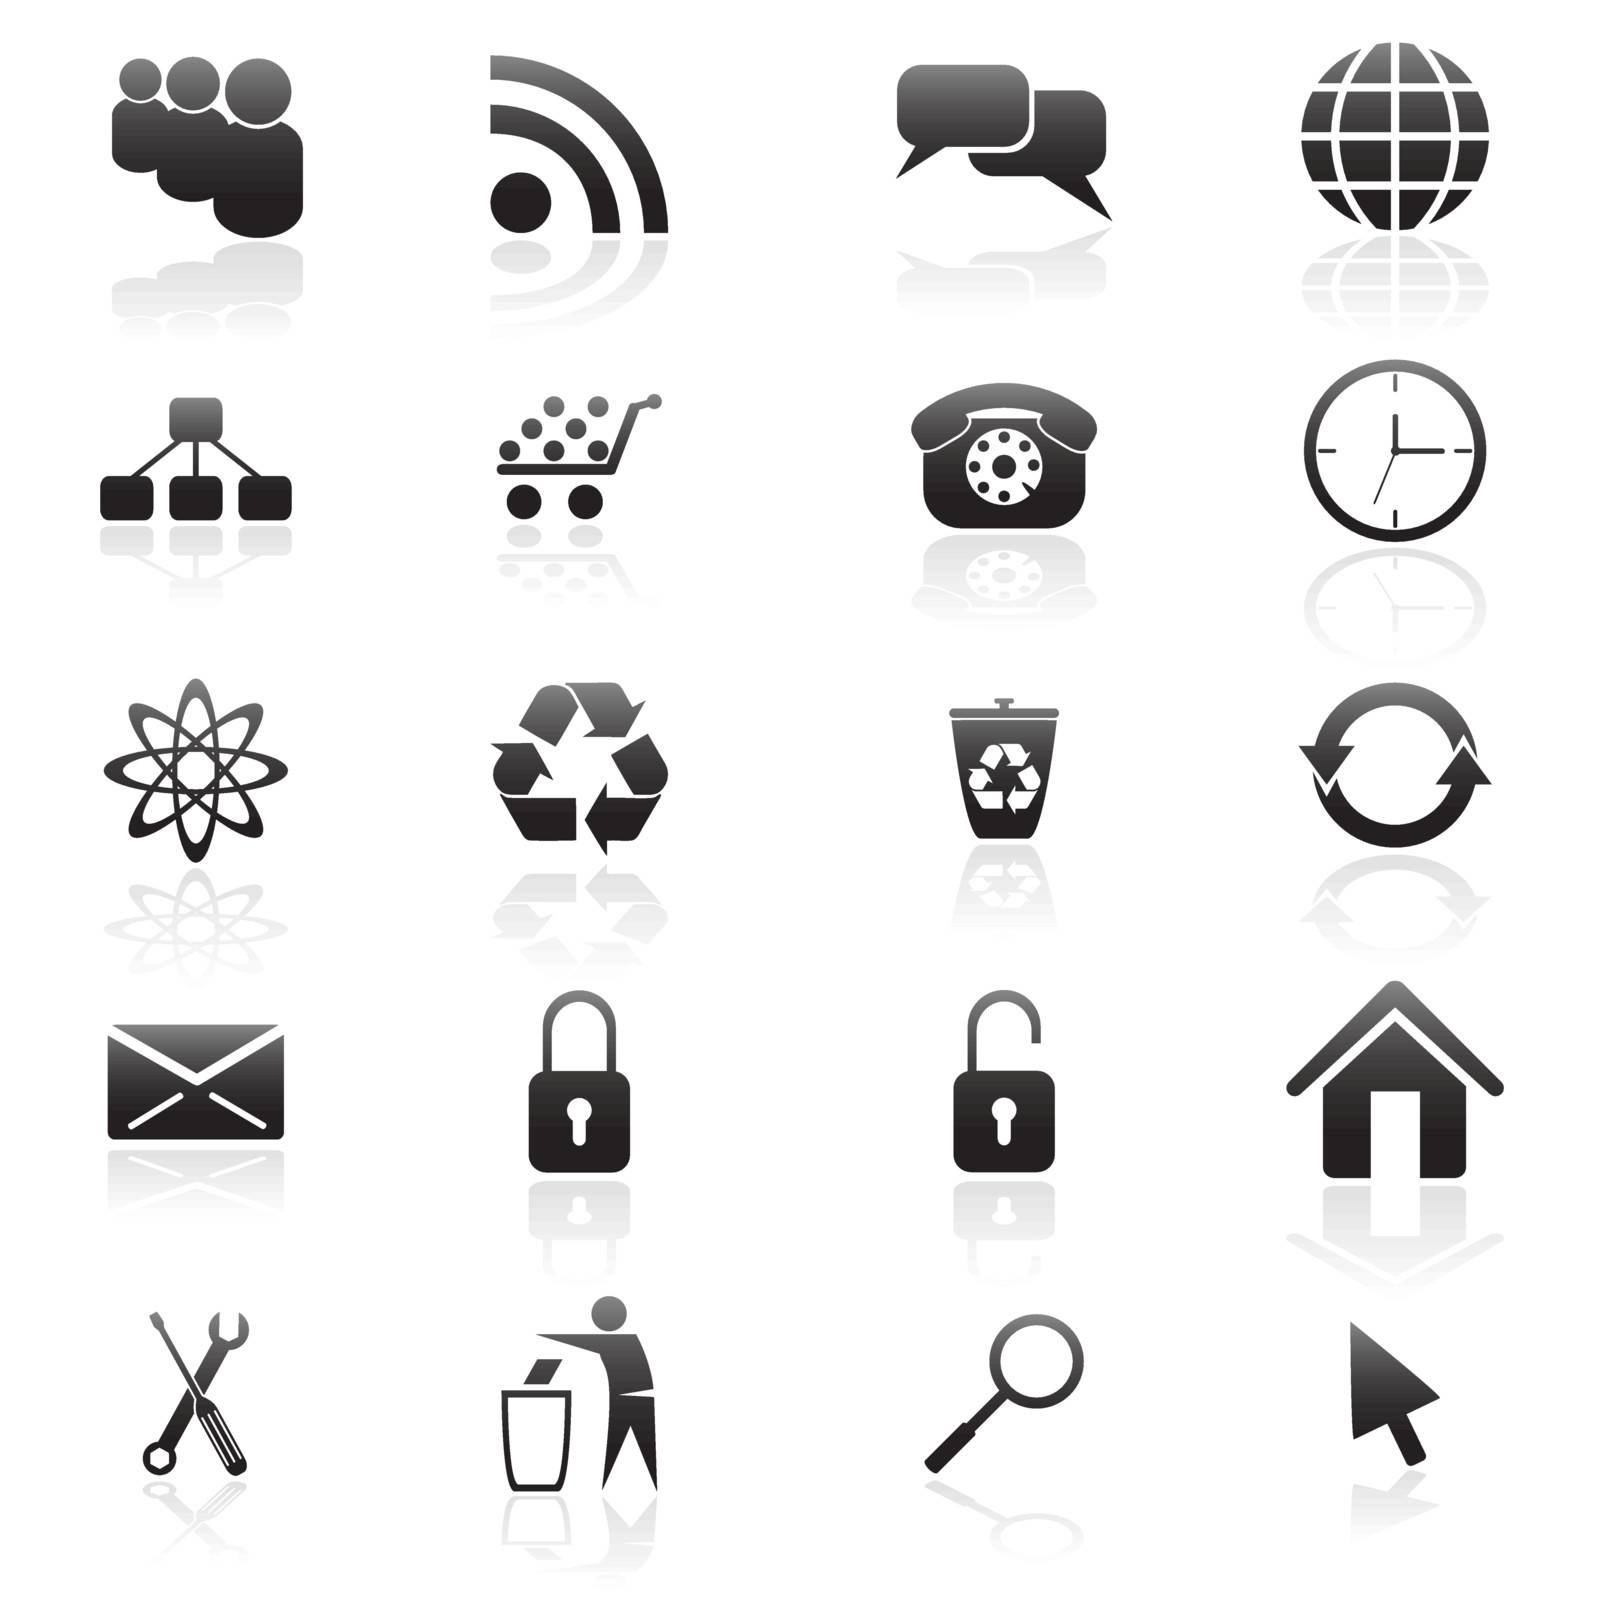 Set of vector icons for web design